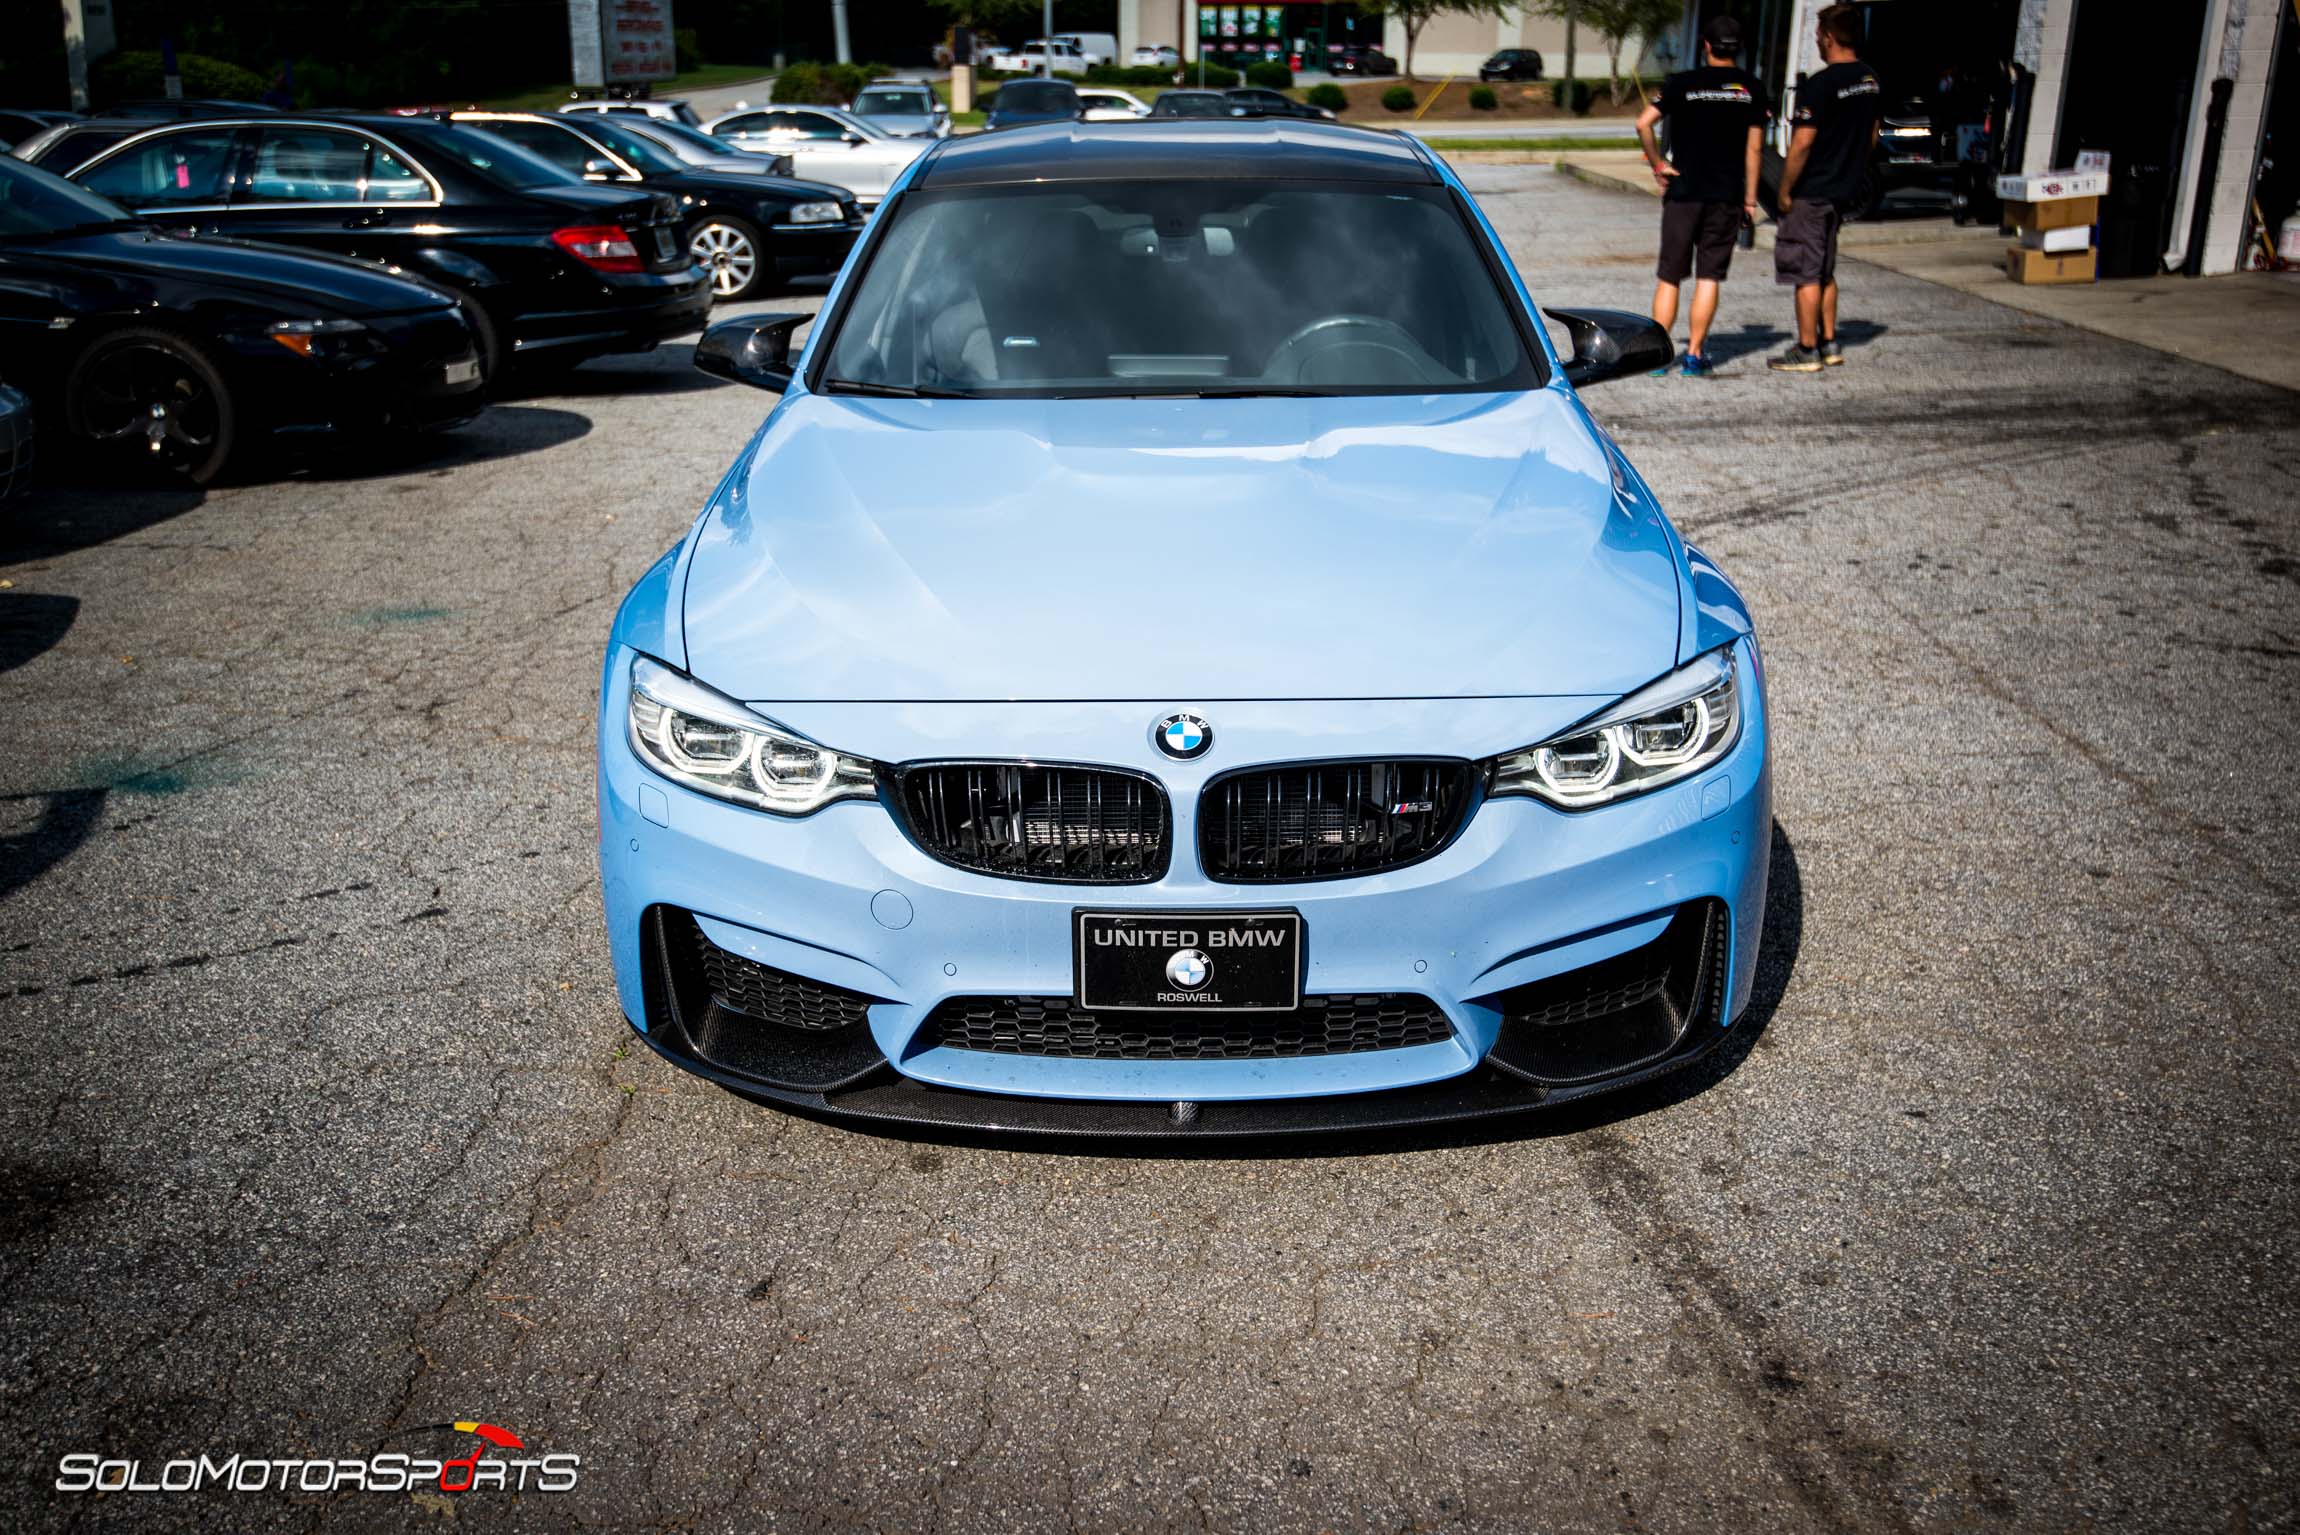 bmw f80 m3 perfomance parts installastion vrsf downpipe intake chargepipe intercooler kw coilovers suspension horsepower mpower jb4 heat exchange